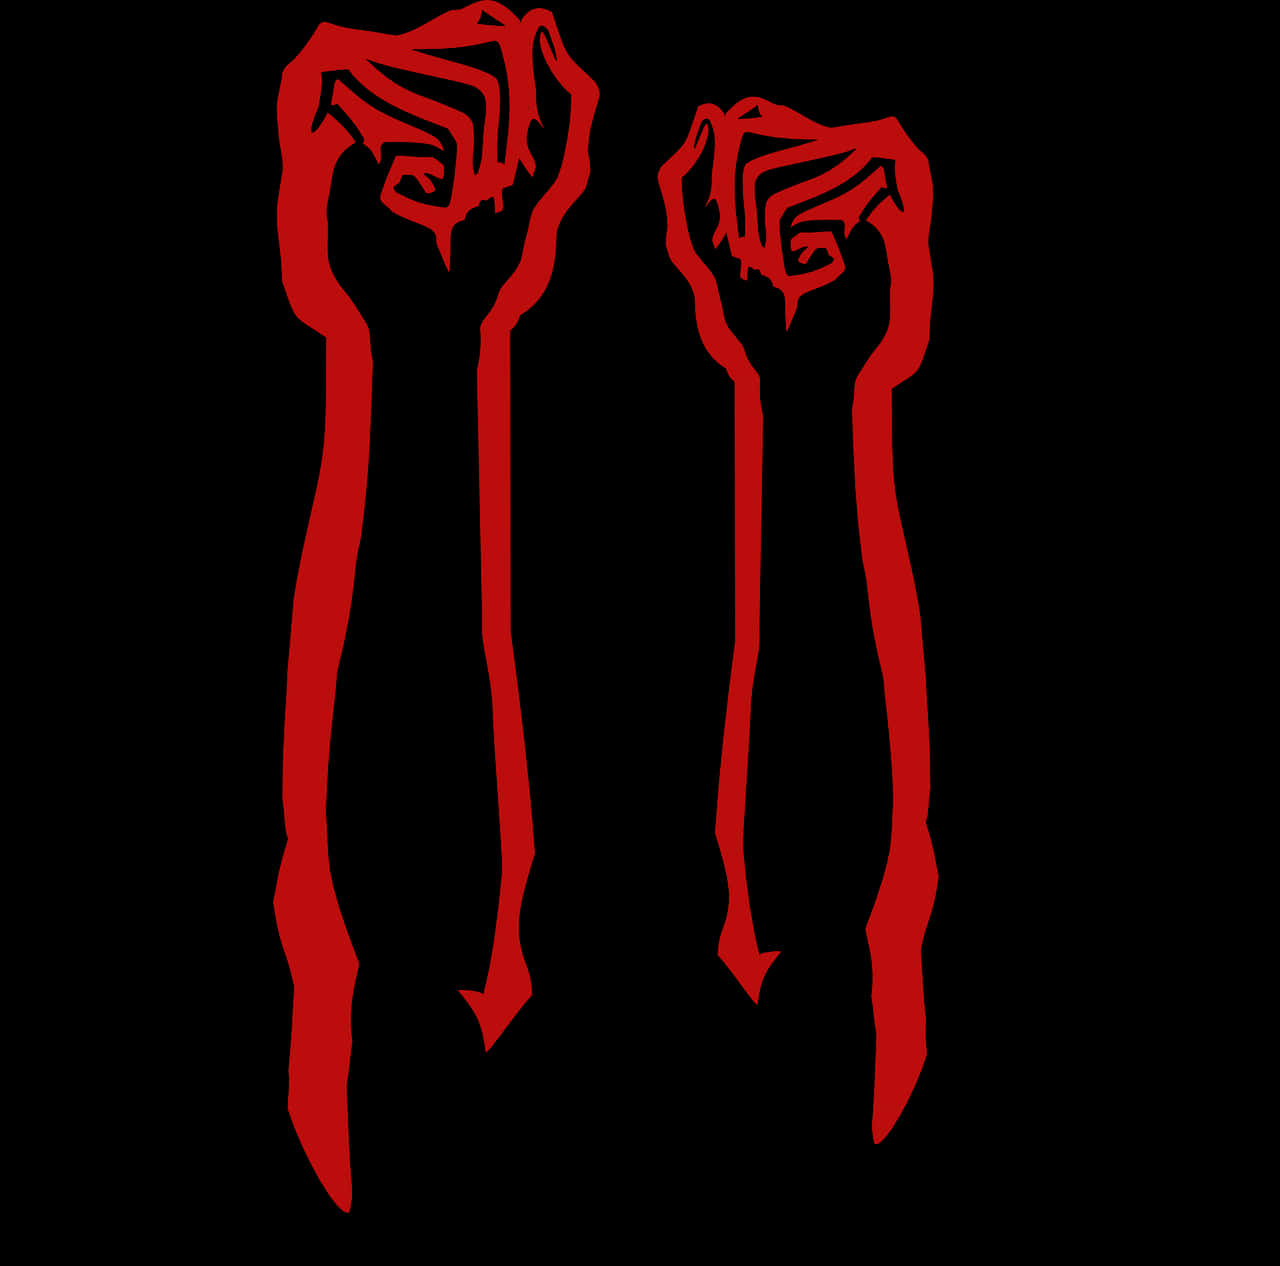 A Red And Black Hand Drawn With Black Background